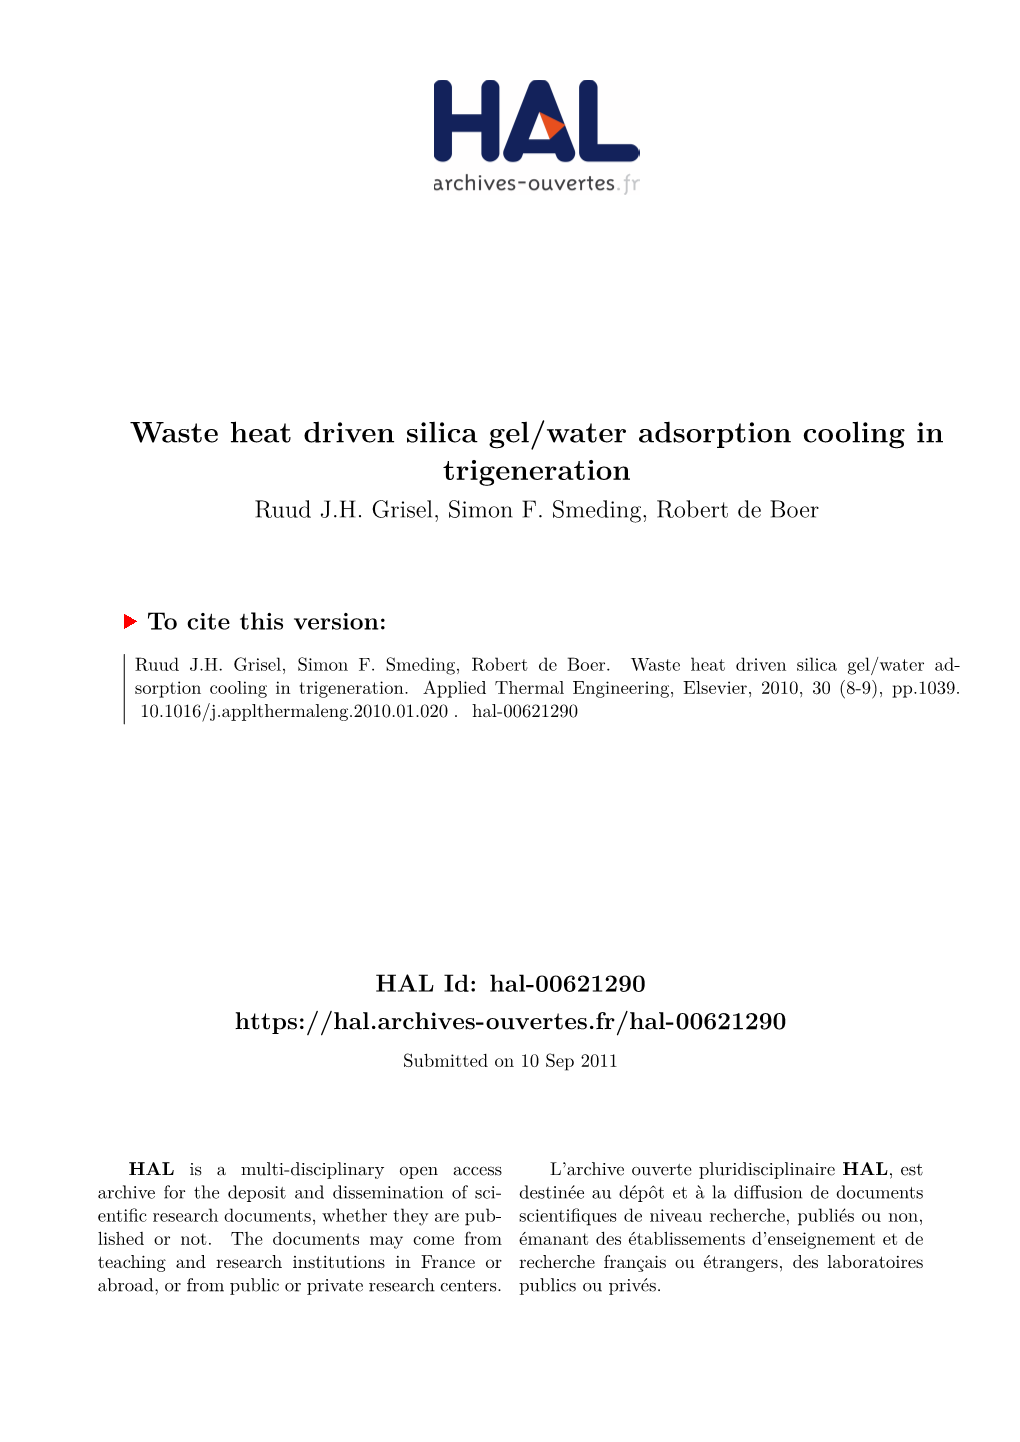 Waste Heat Driven Silica Gel/Water Adsorption Cooling in Trigeneration Ruud J.H